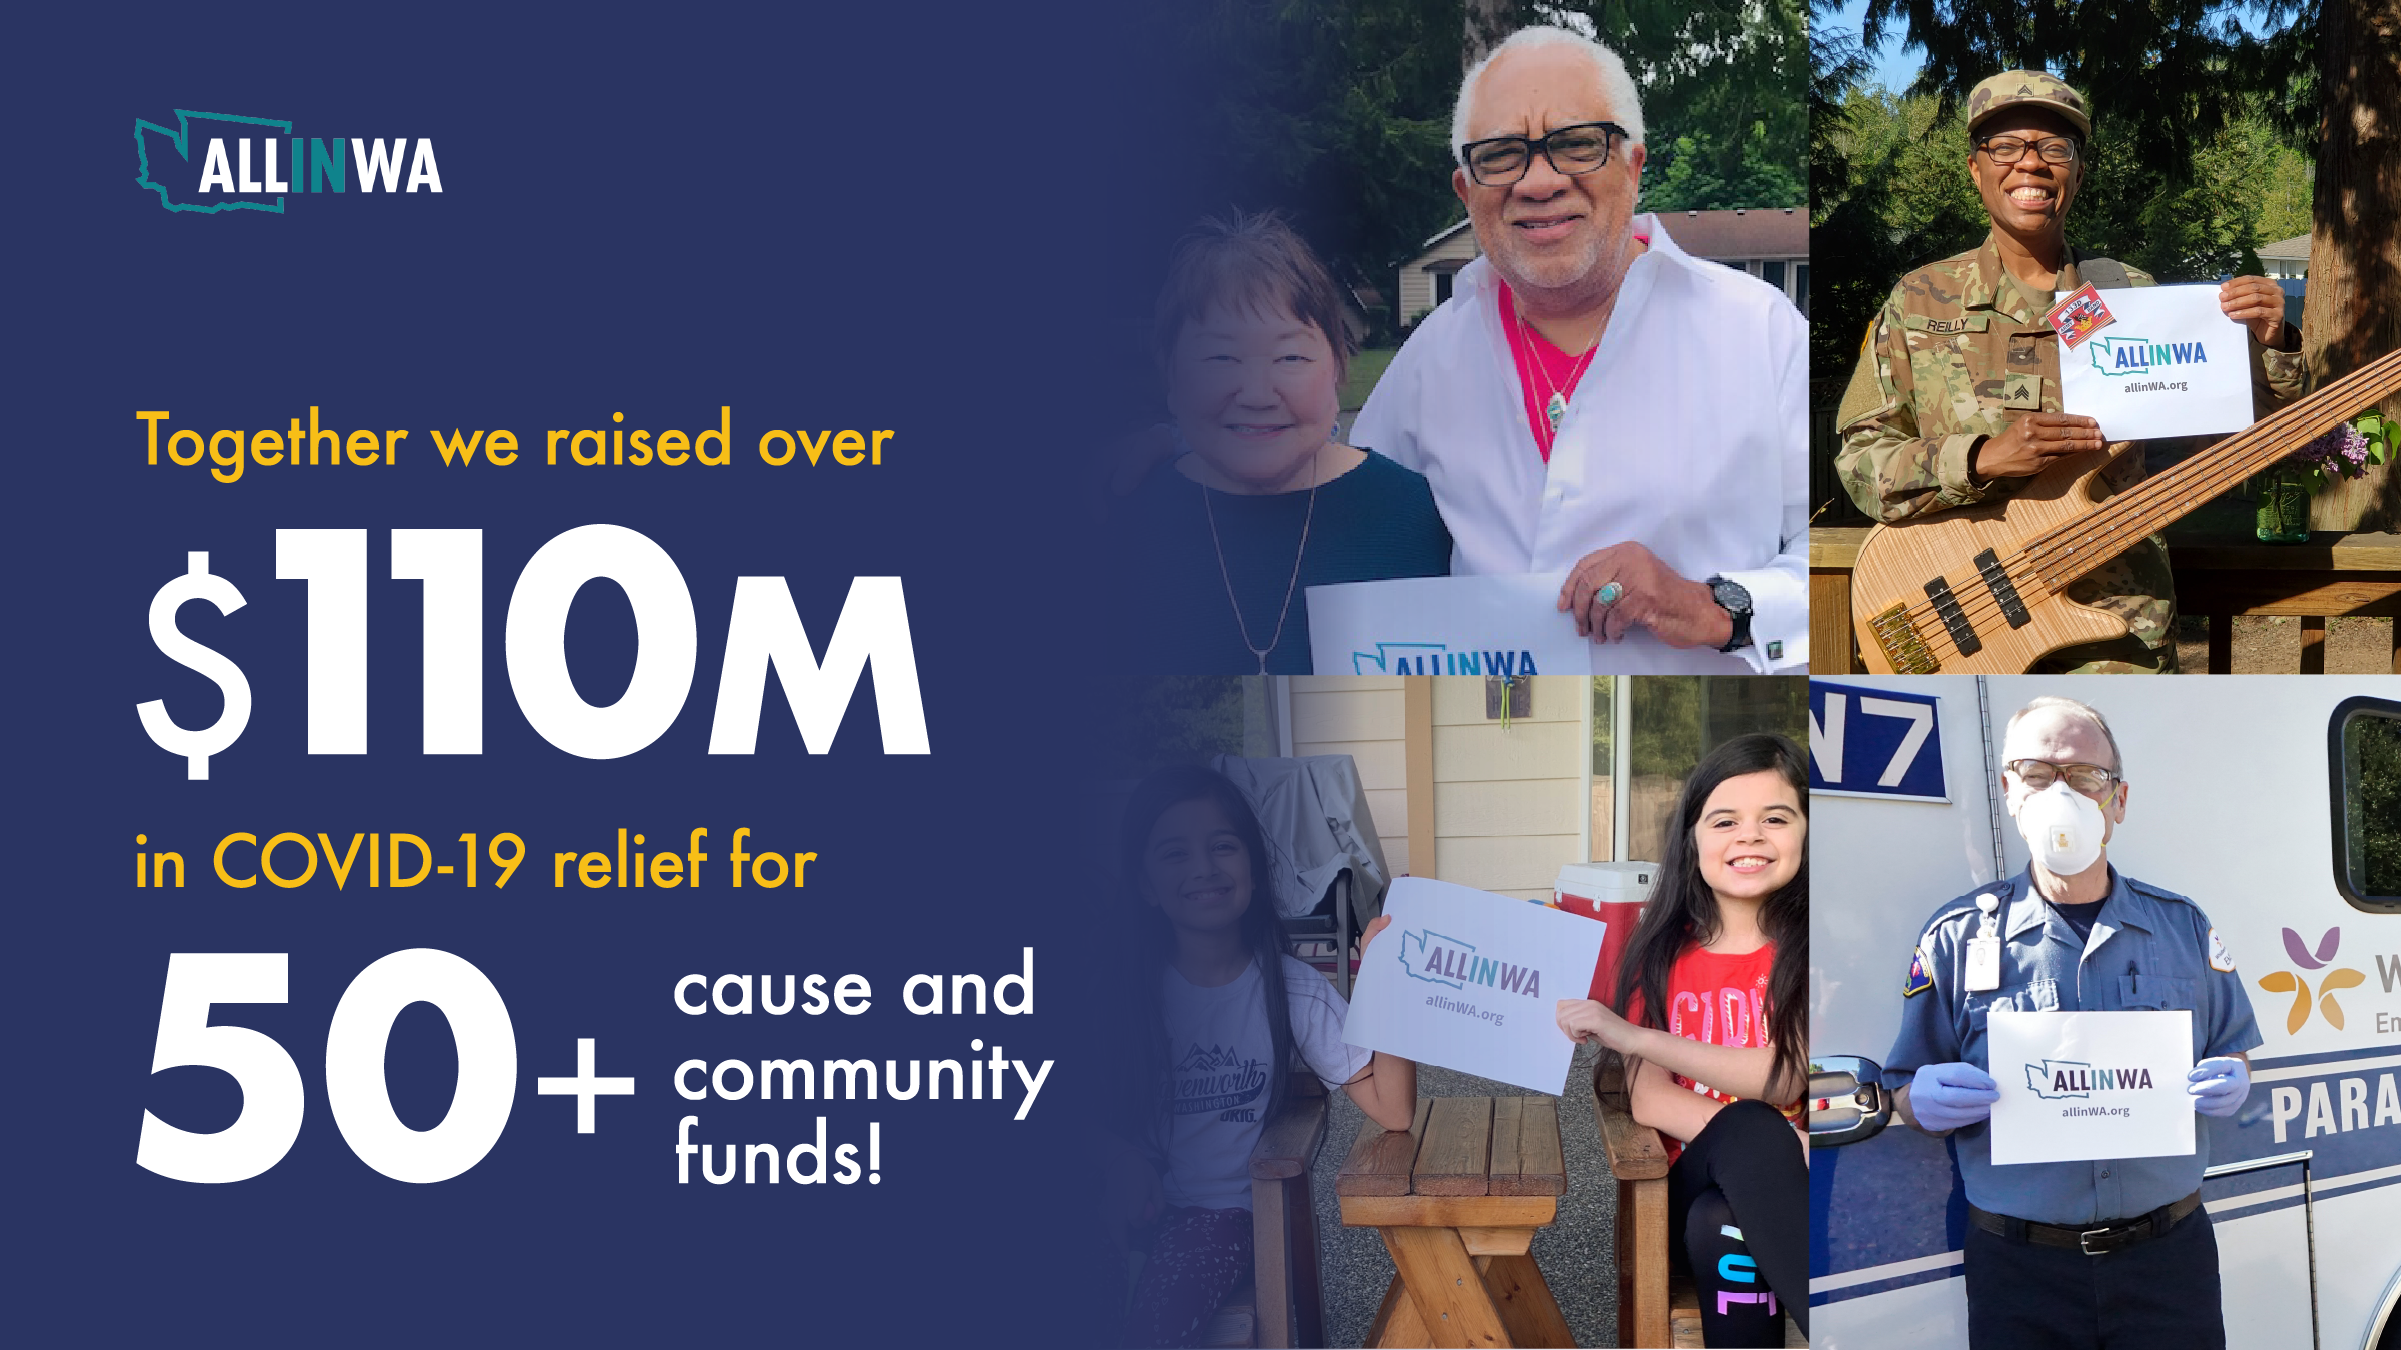 Bold white text that reads "Together we raised over $110M in COVID Relief for 50+ cause and community funds" on a dark blue gradient that bleeds over a collage of people holding All In Washington Signs.